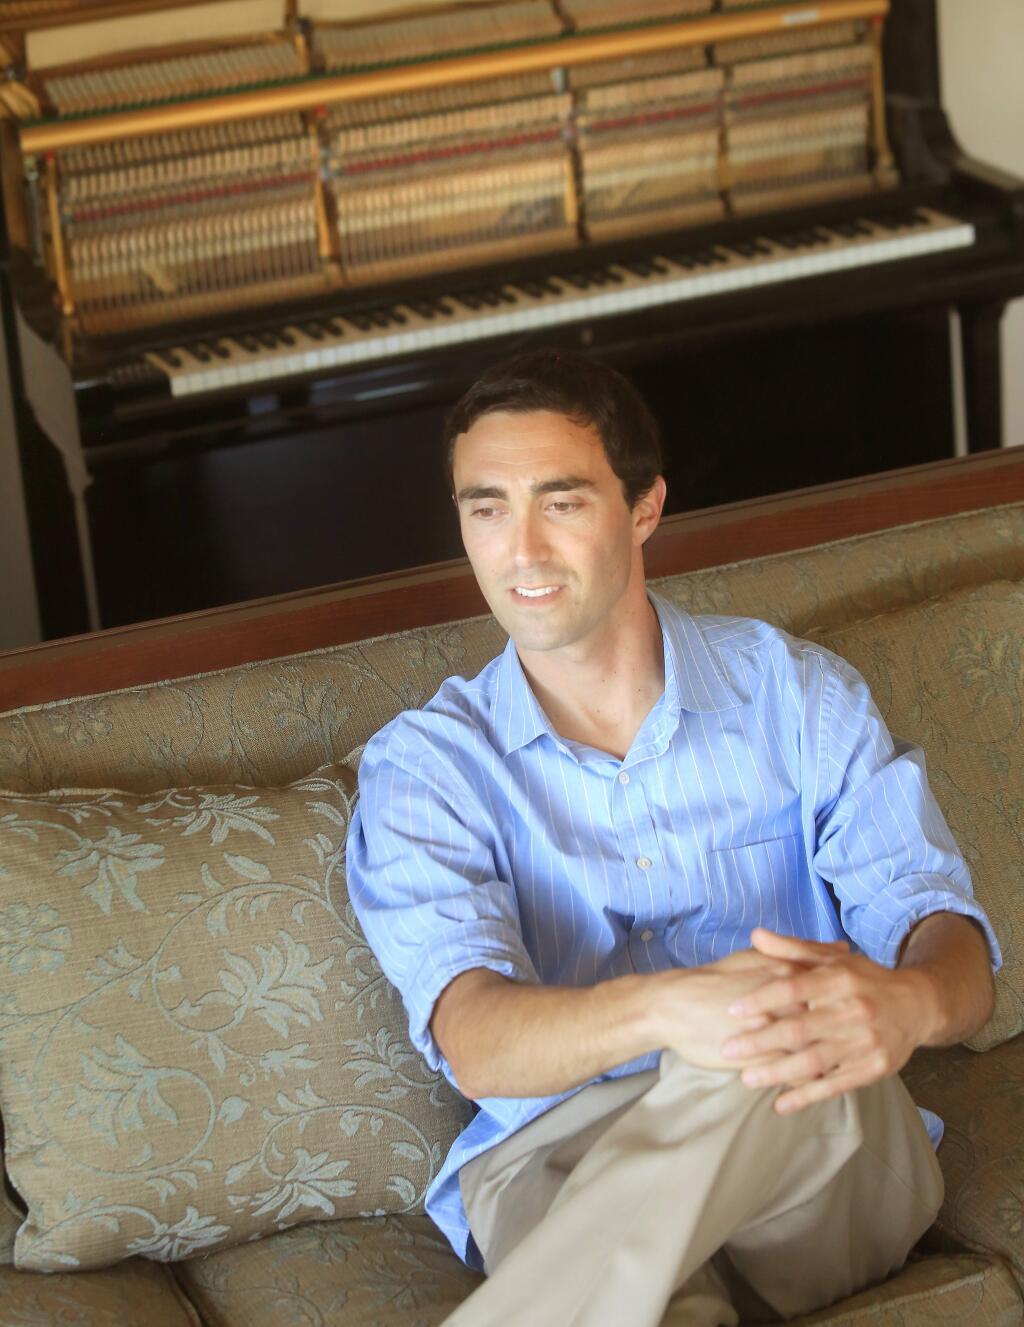 -Pianist Beau Flasher of Sebastopol suffered a fall that cut tendons in his right hand. After several years of therapy, he's back on the stage again.